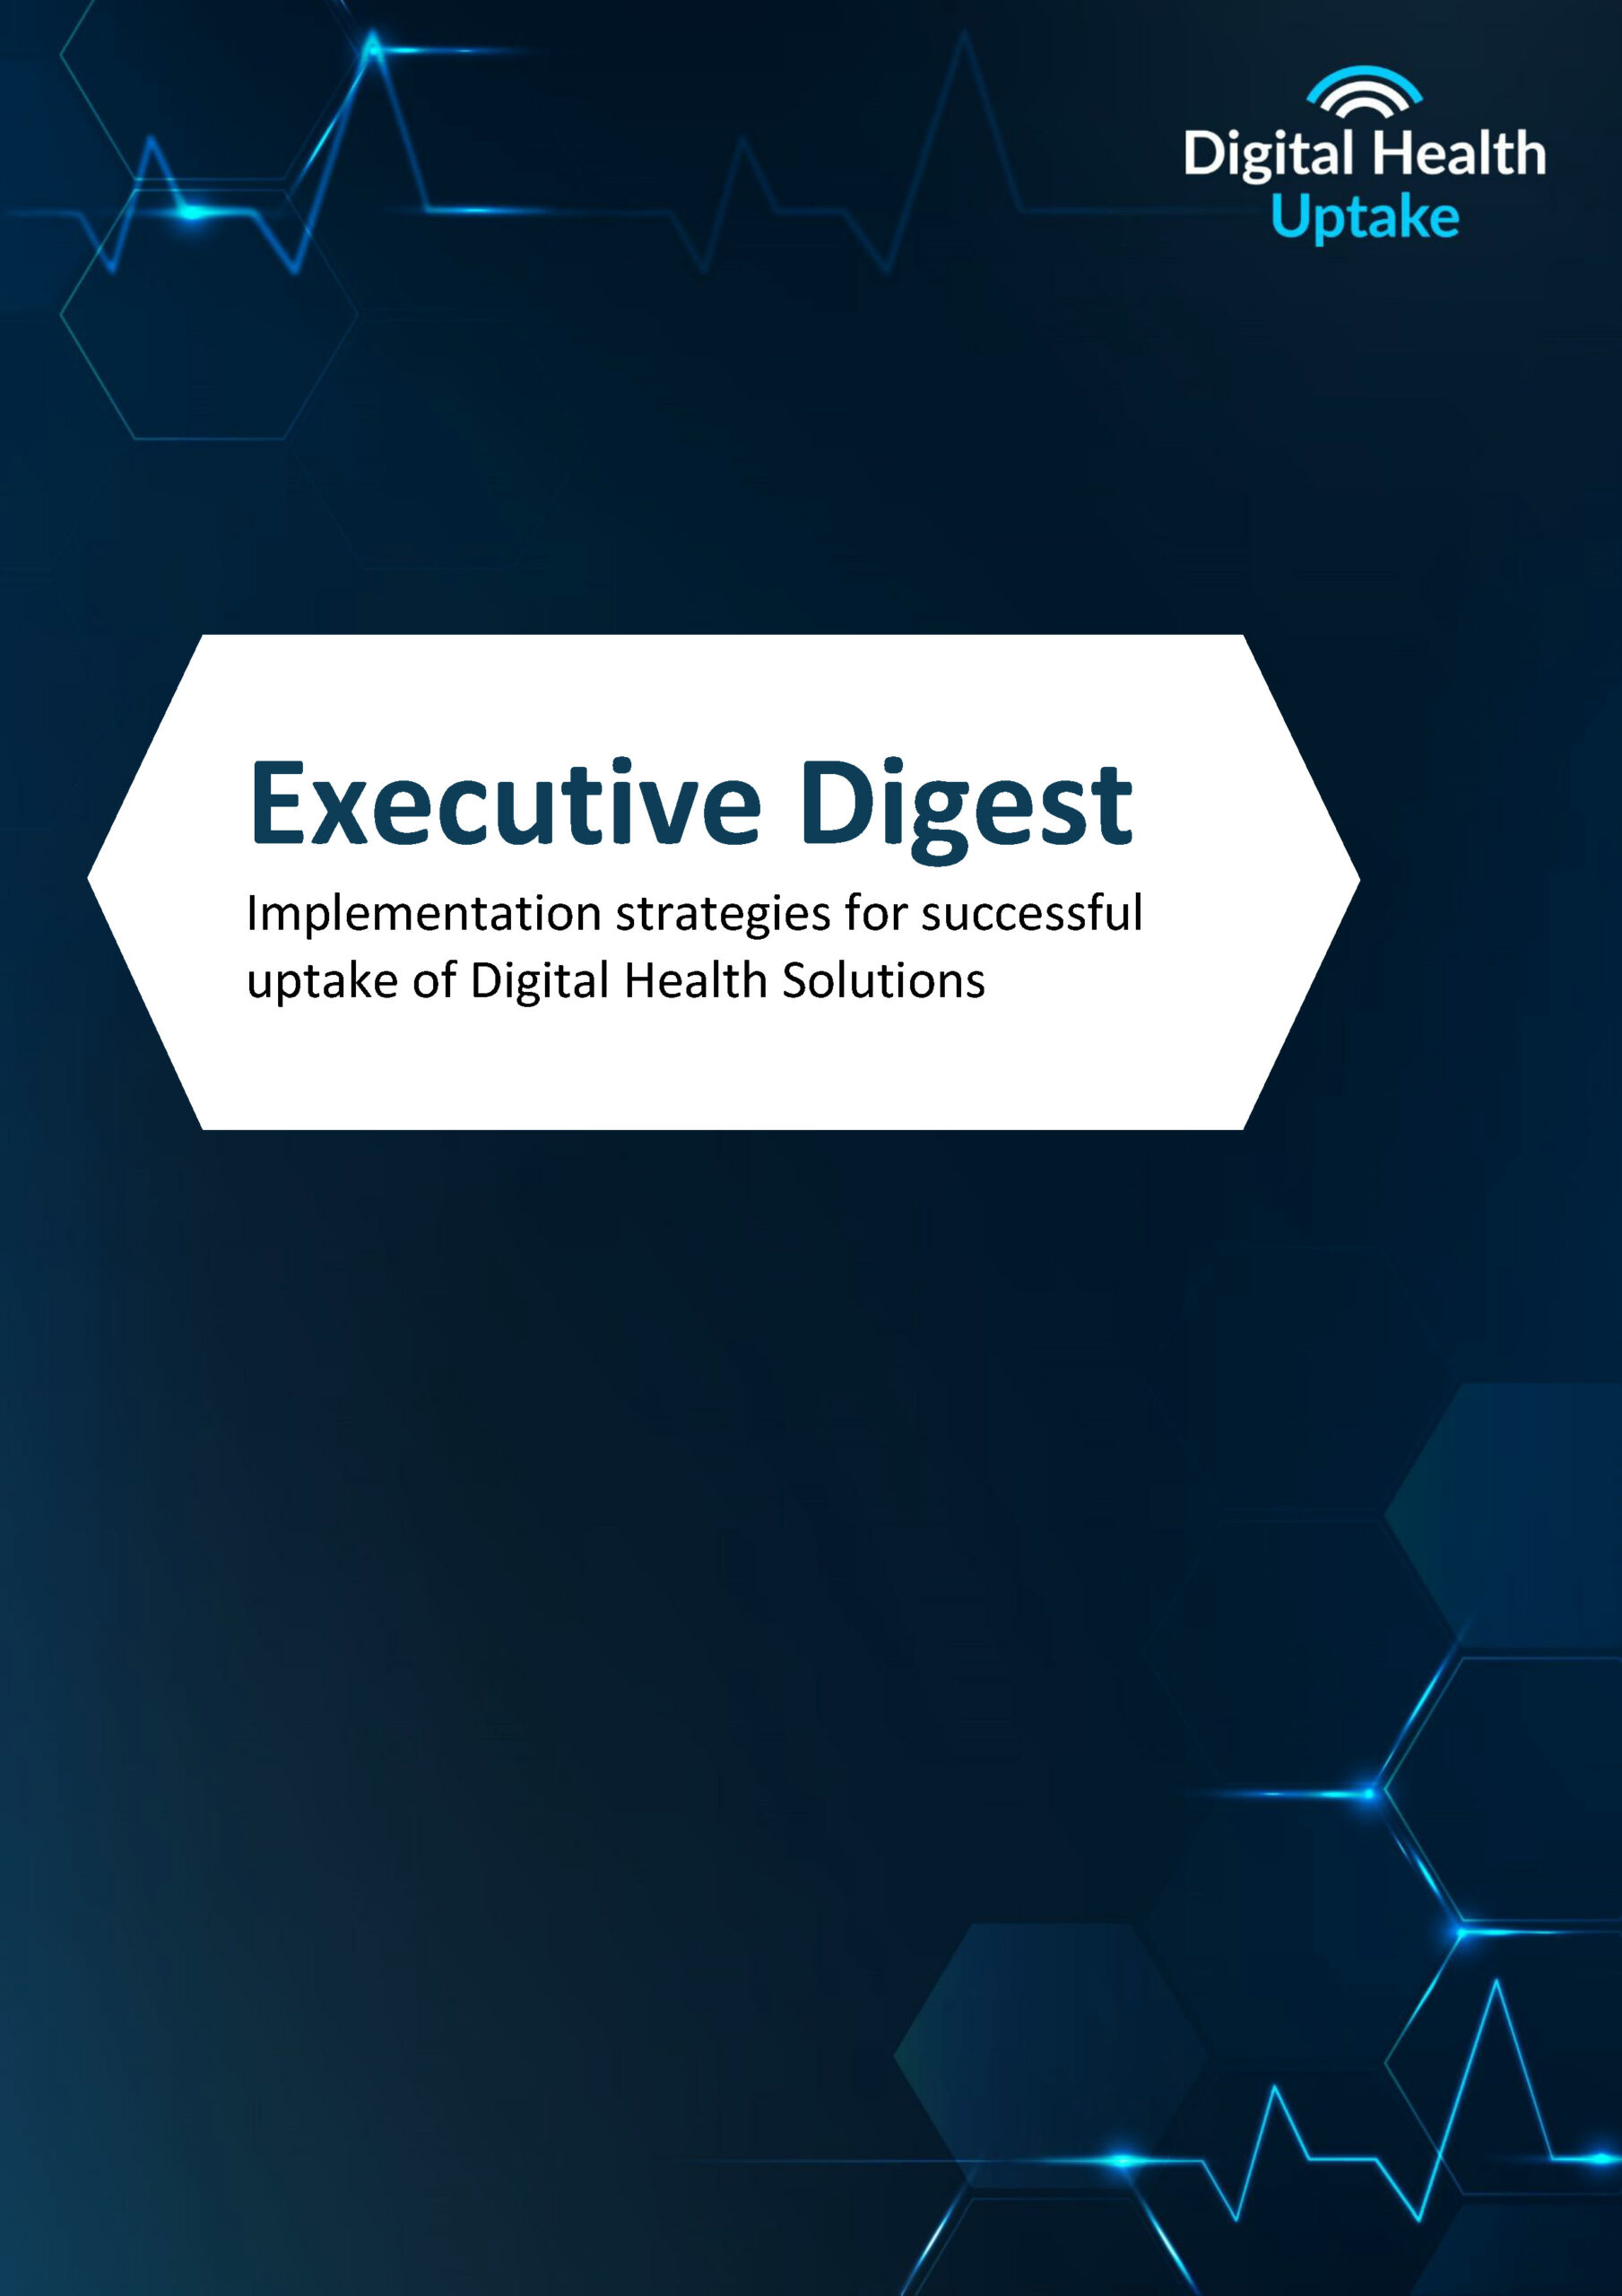 DHU Executive Digest Implementation strategies cover